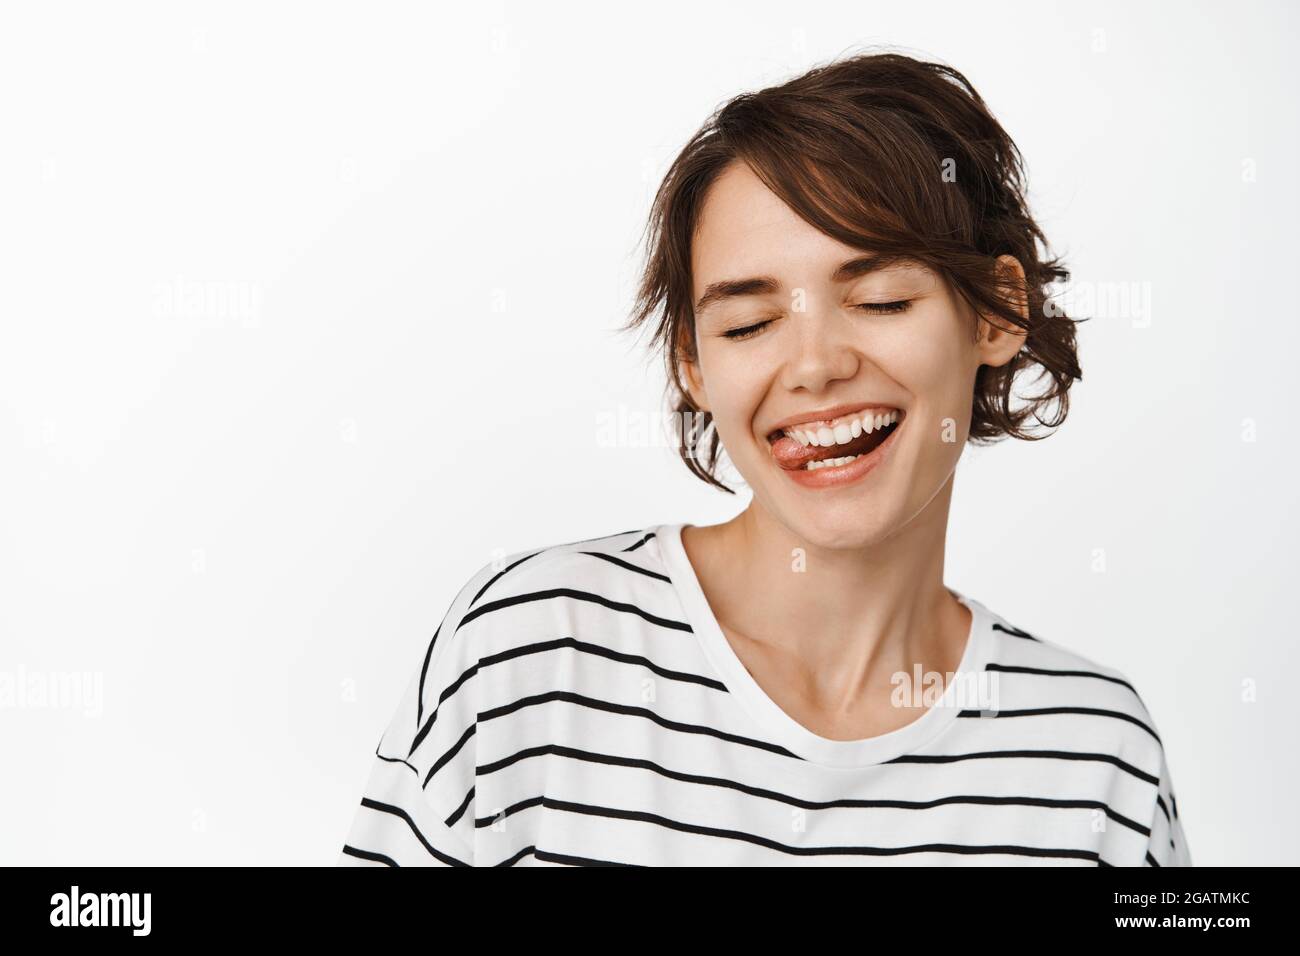 Close up portrait of beautiful carefree girl, woman laughing and ...